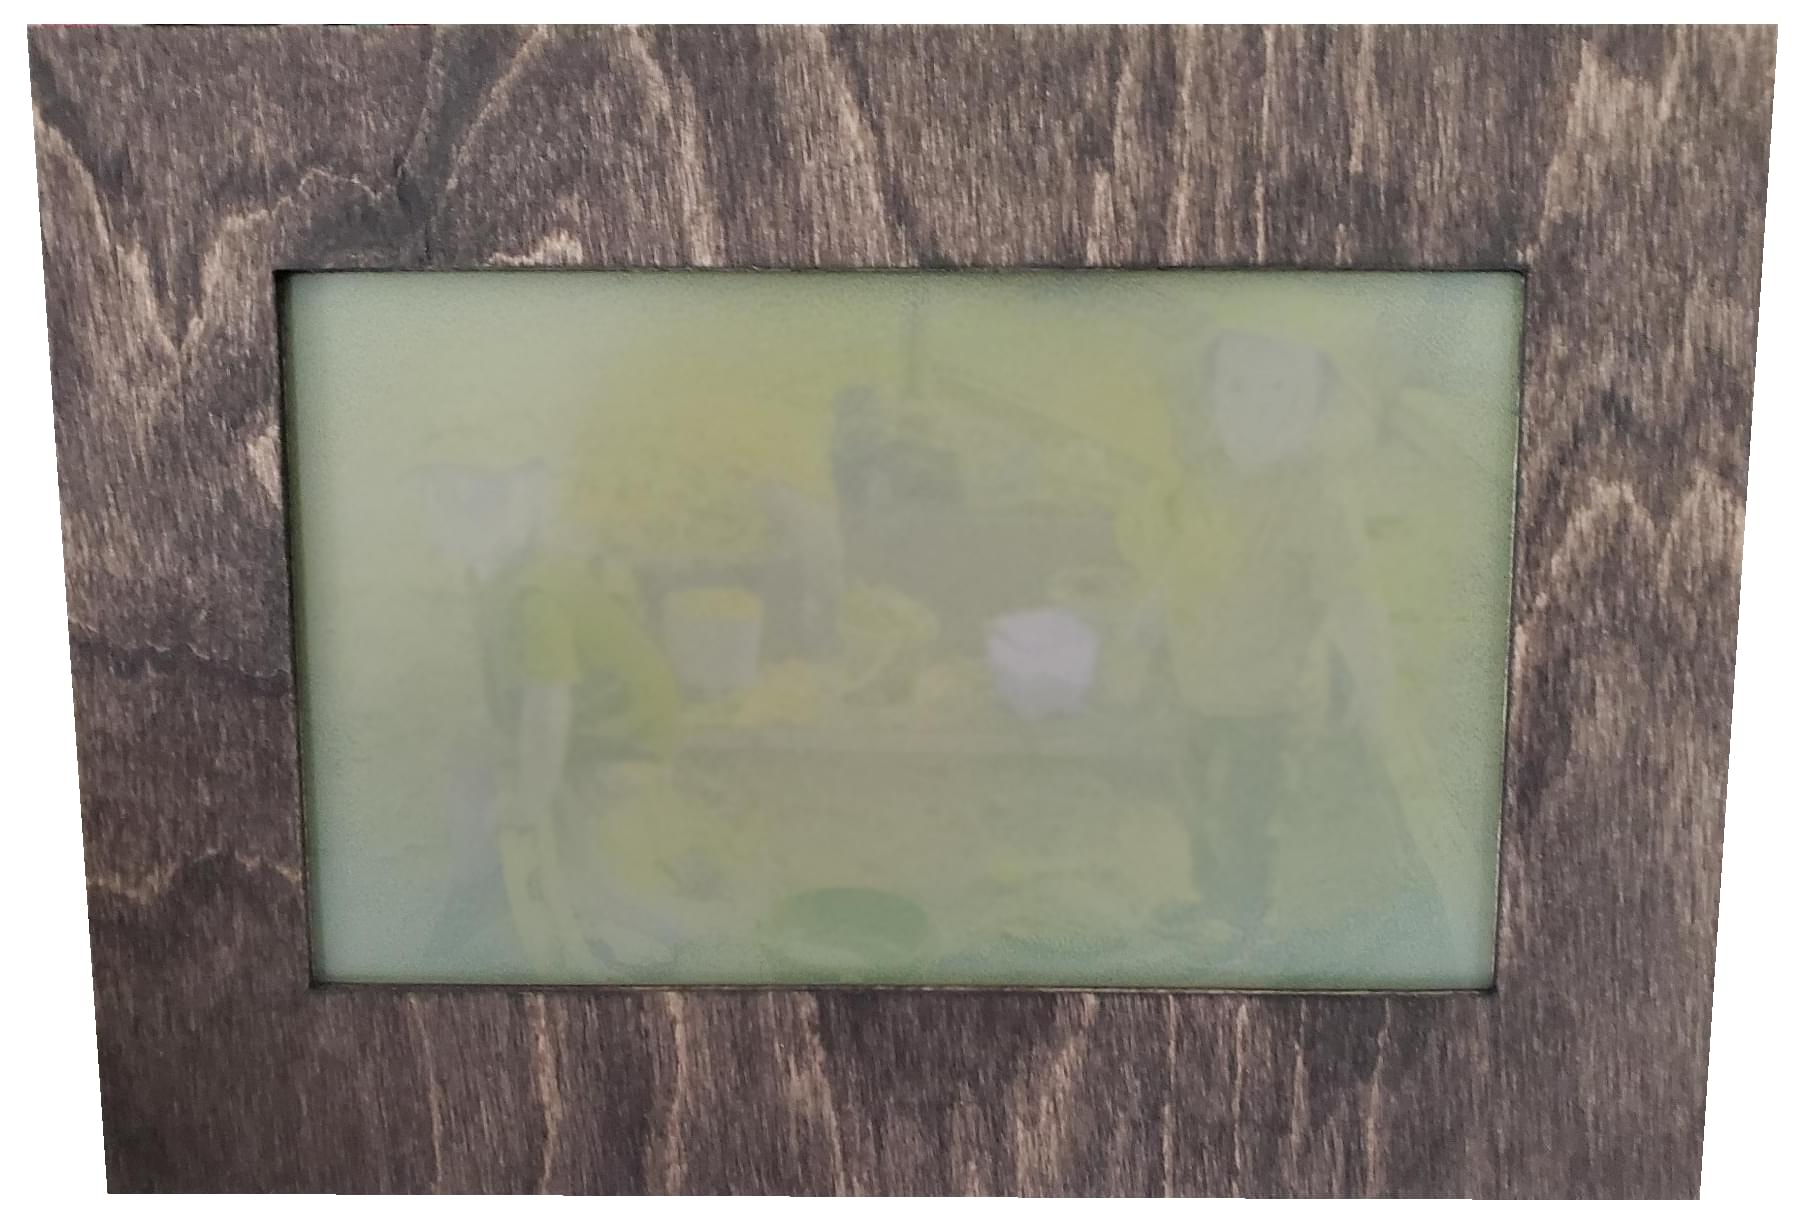 An e-ink digital photo frame with an image in transition